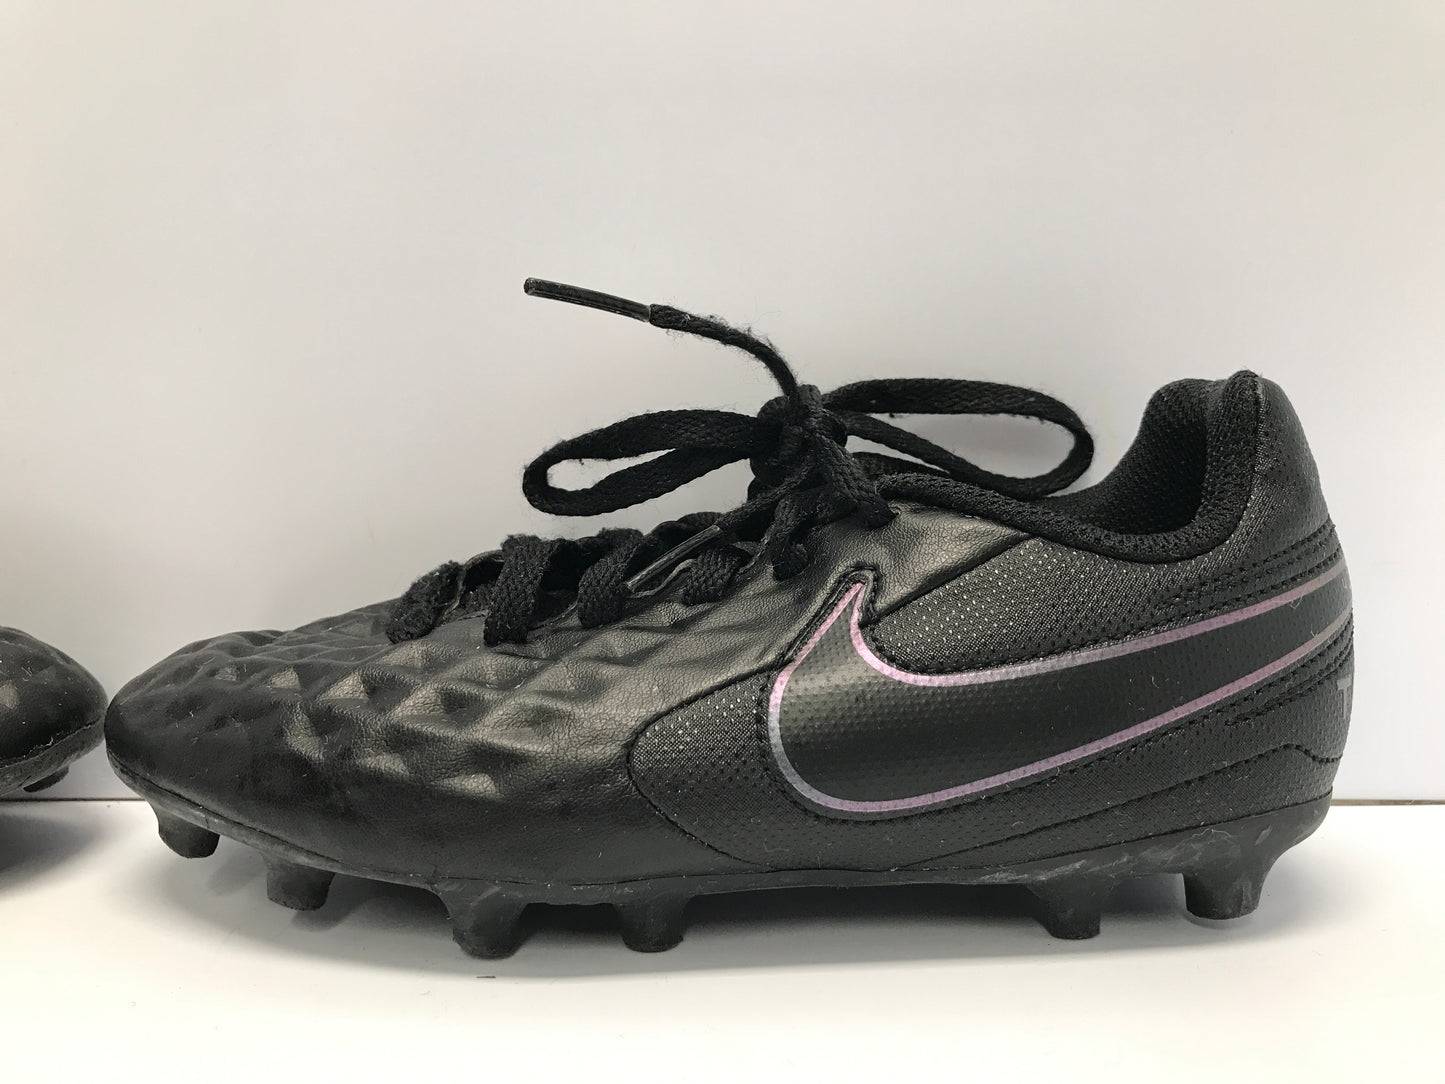 Soccer Shoes Cleats Child Size 12 Nike Tiemp Black Ghost Excellent